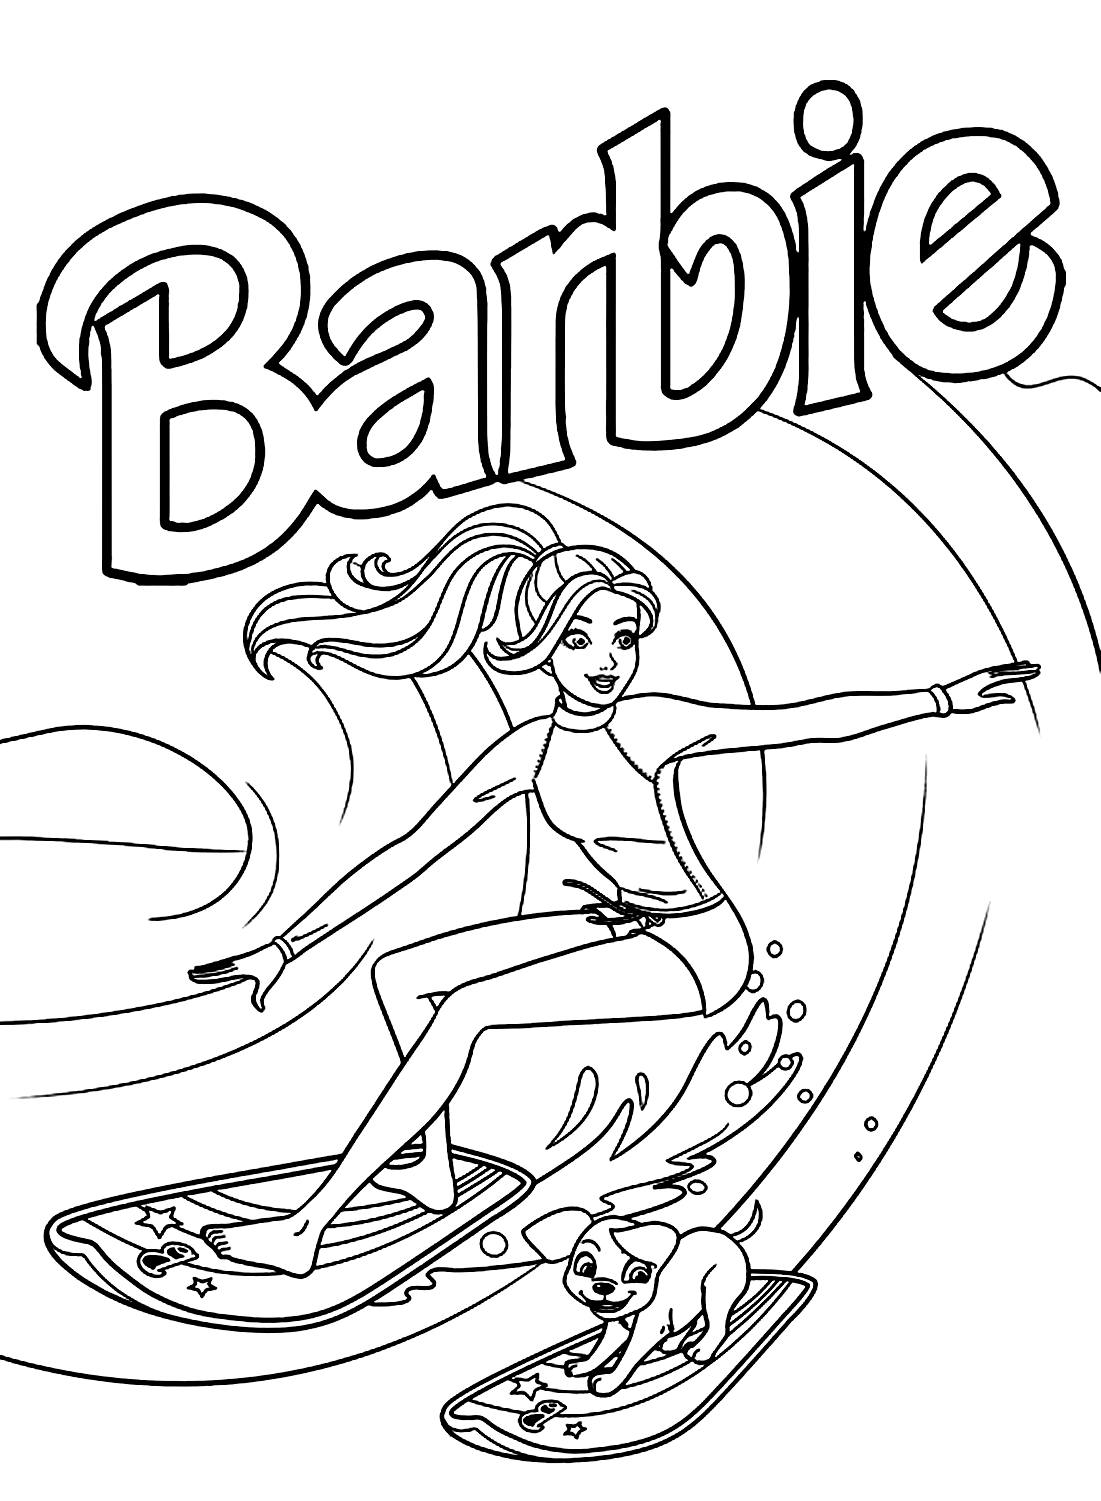 Surfing Barbie Color Page from Barbie